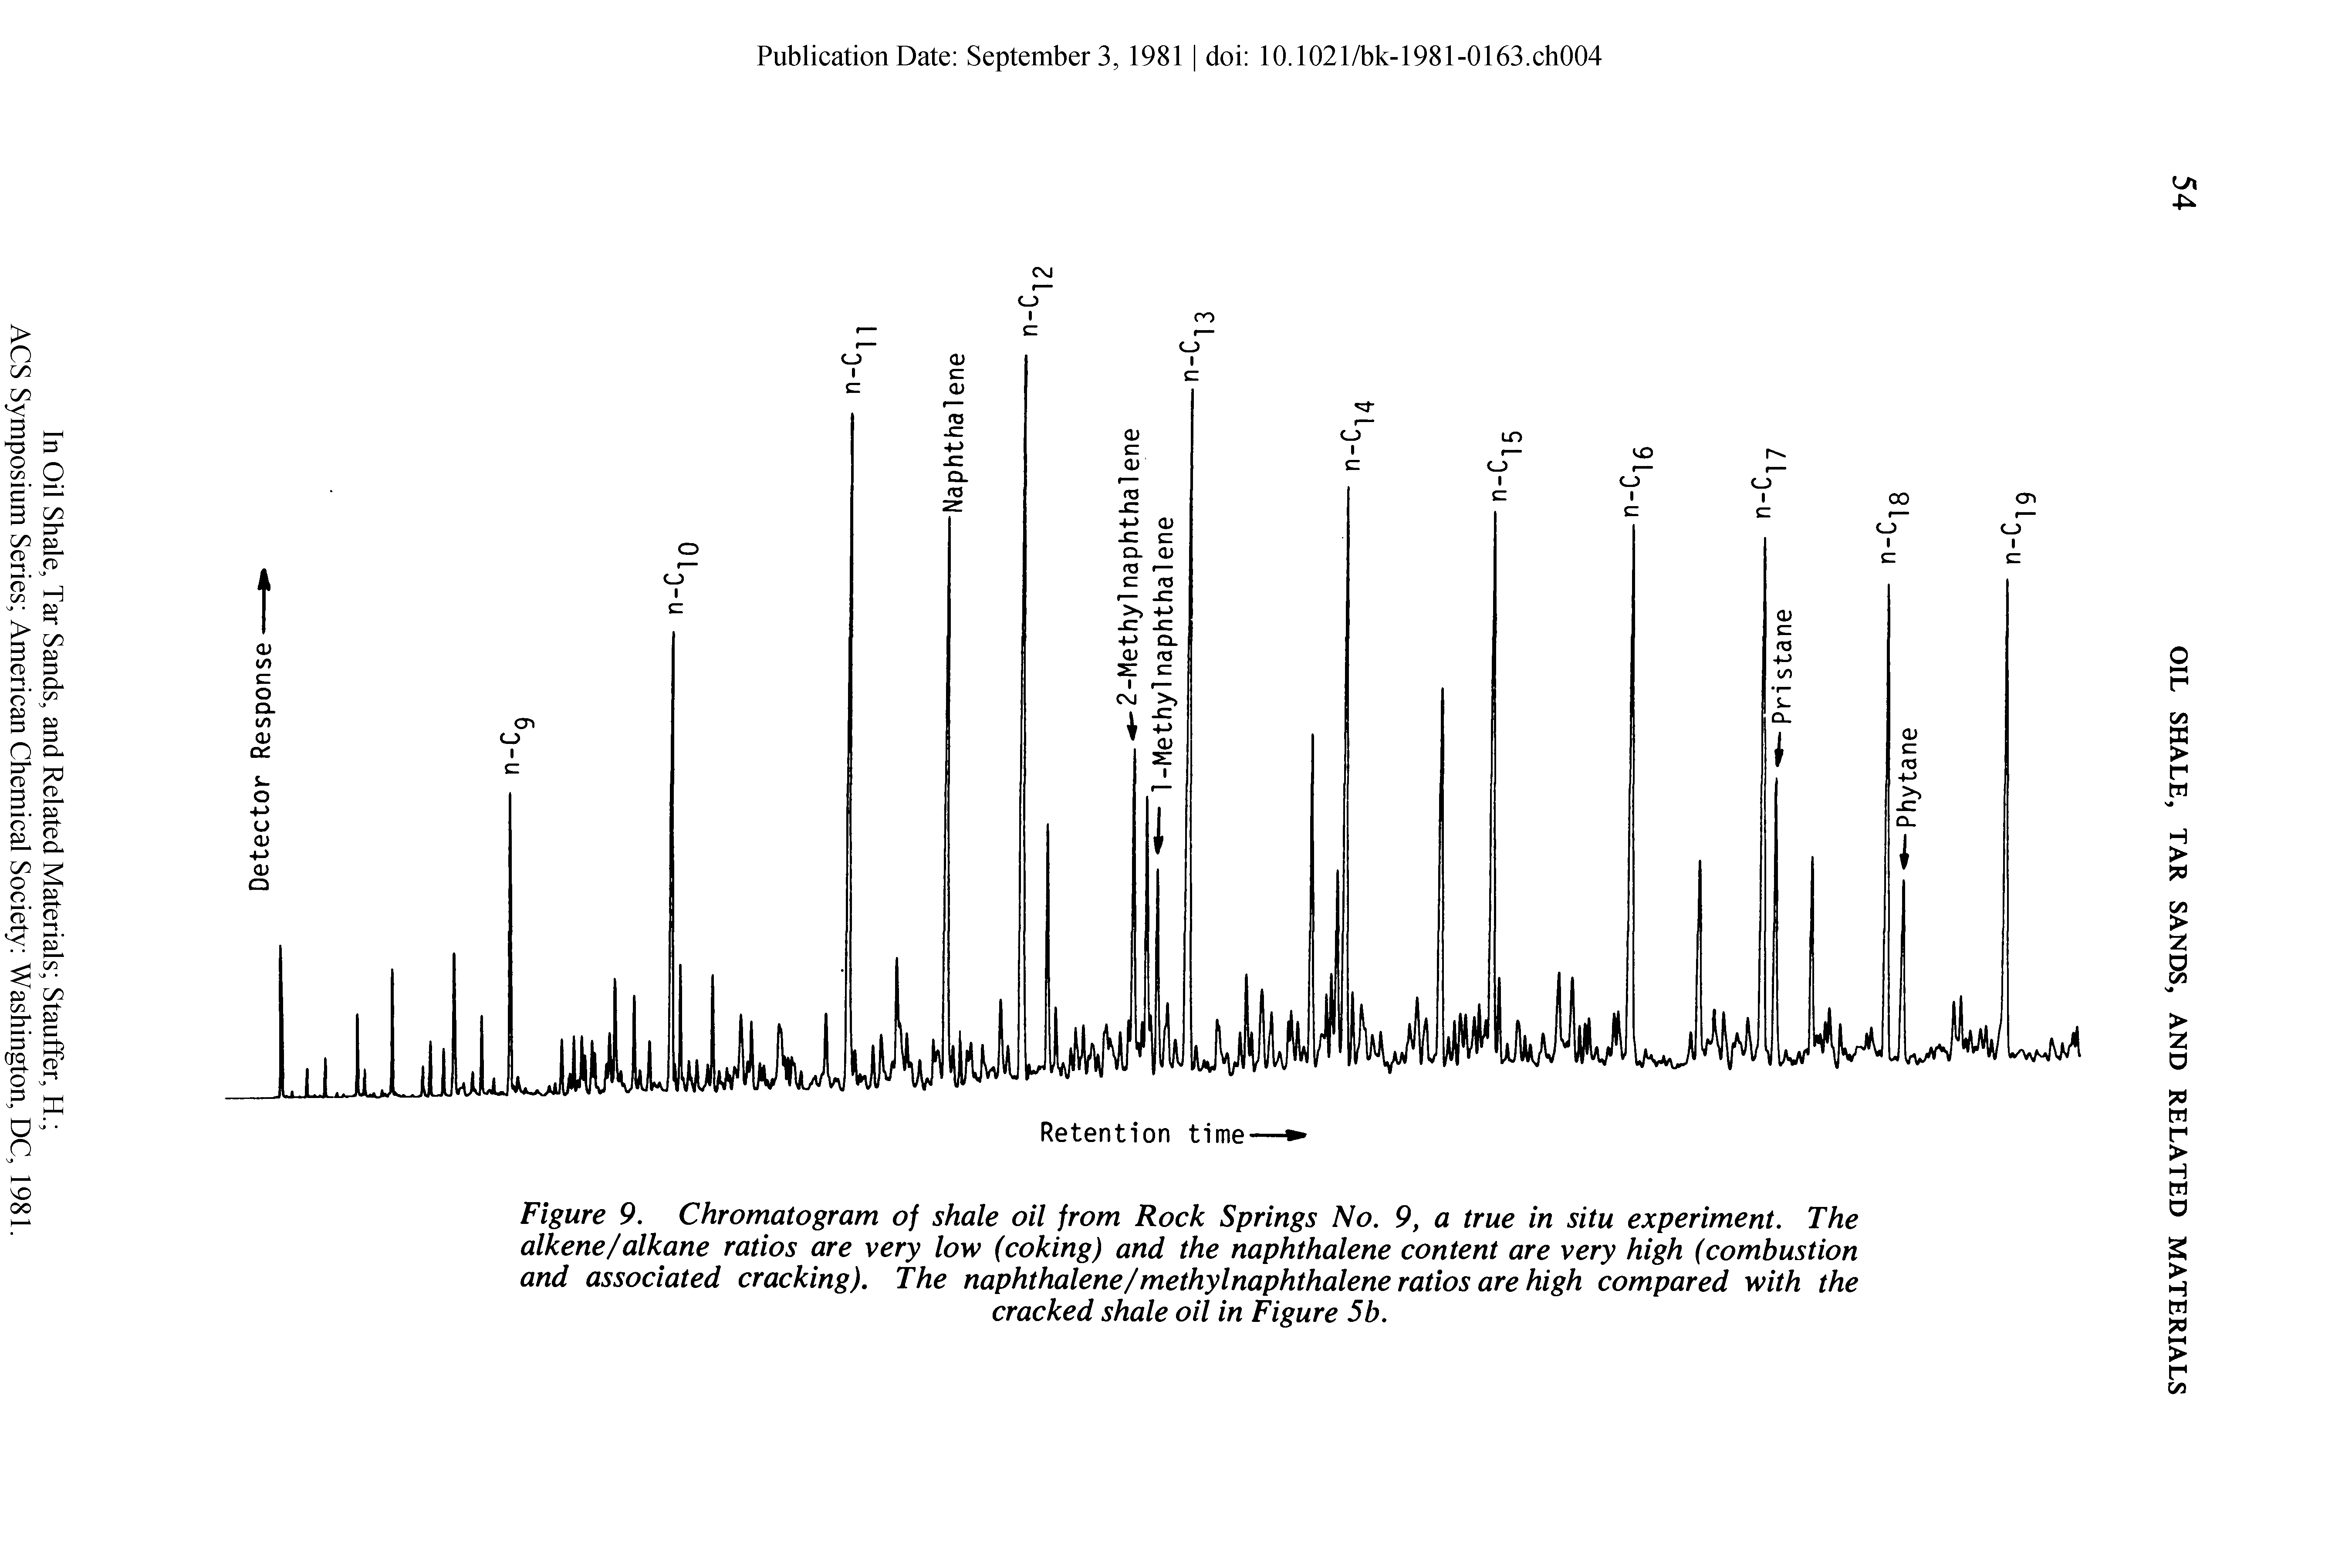 Figure 9. Chromatogram of shale oil from Rock Springs No. 9, a true in situ experiment. The alkene/alkane ratios are very low (coking) and the naphthalene content are very high (combustion and associated cracking). The naphthalene/methylnaphthalene ratios are high compared with the...